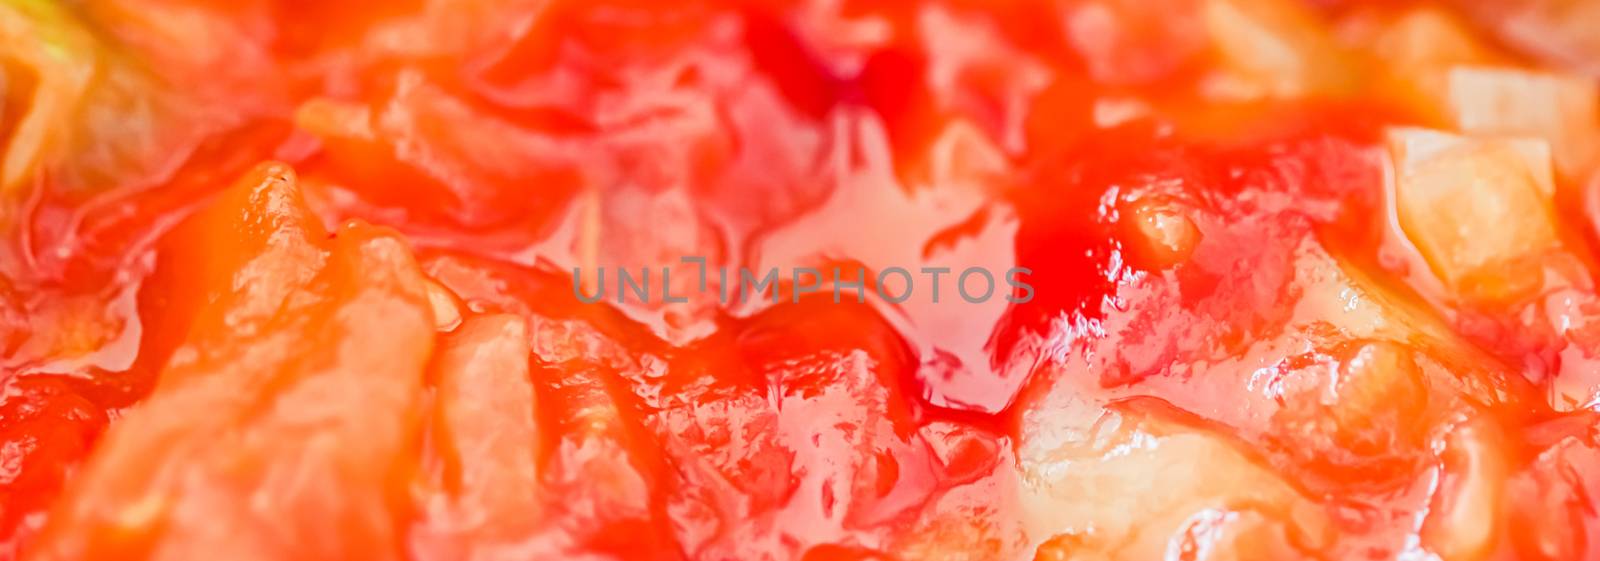 Cooking tomato sauce, closeup steamed vegetables for cook book o by Anneleven